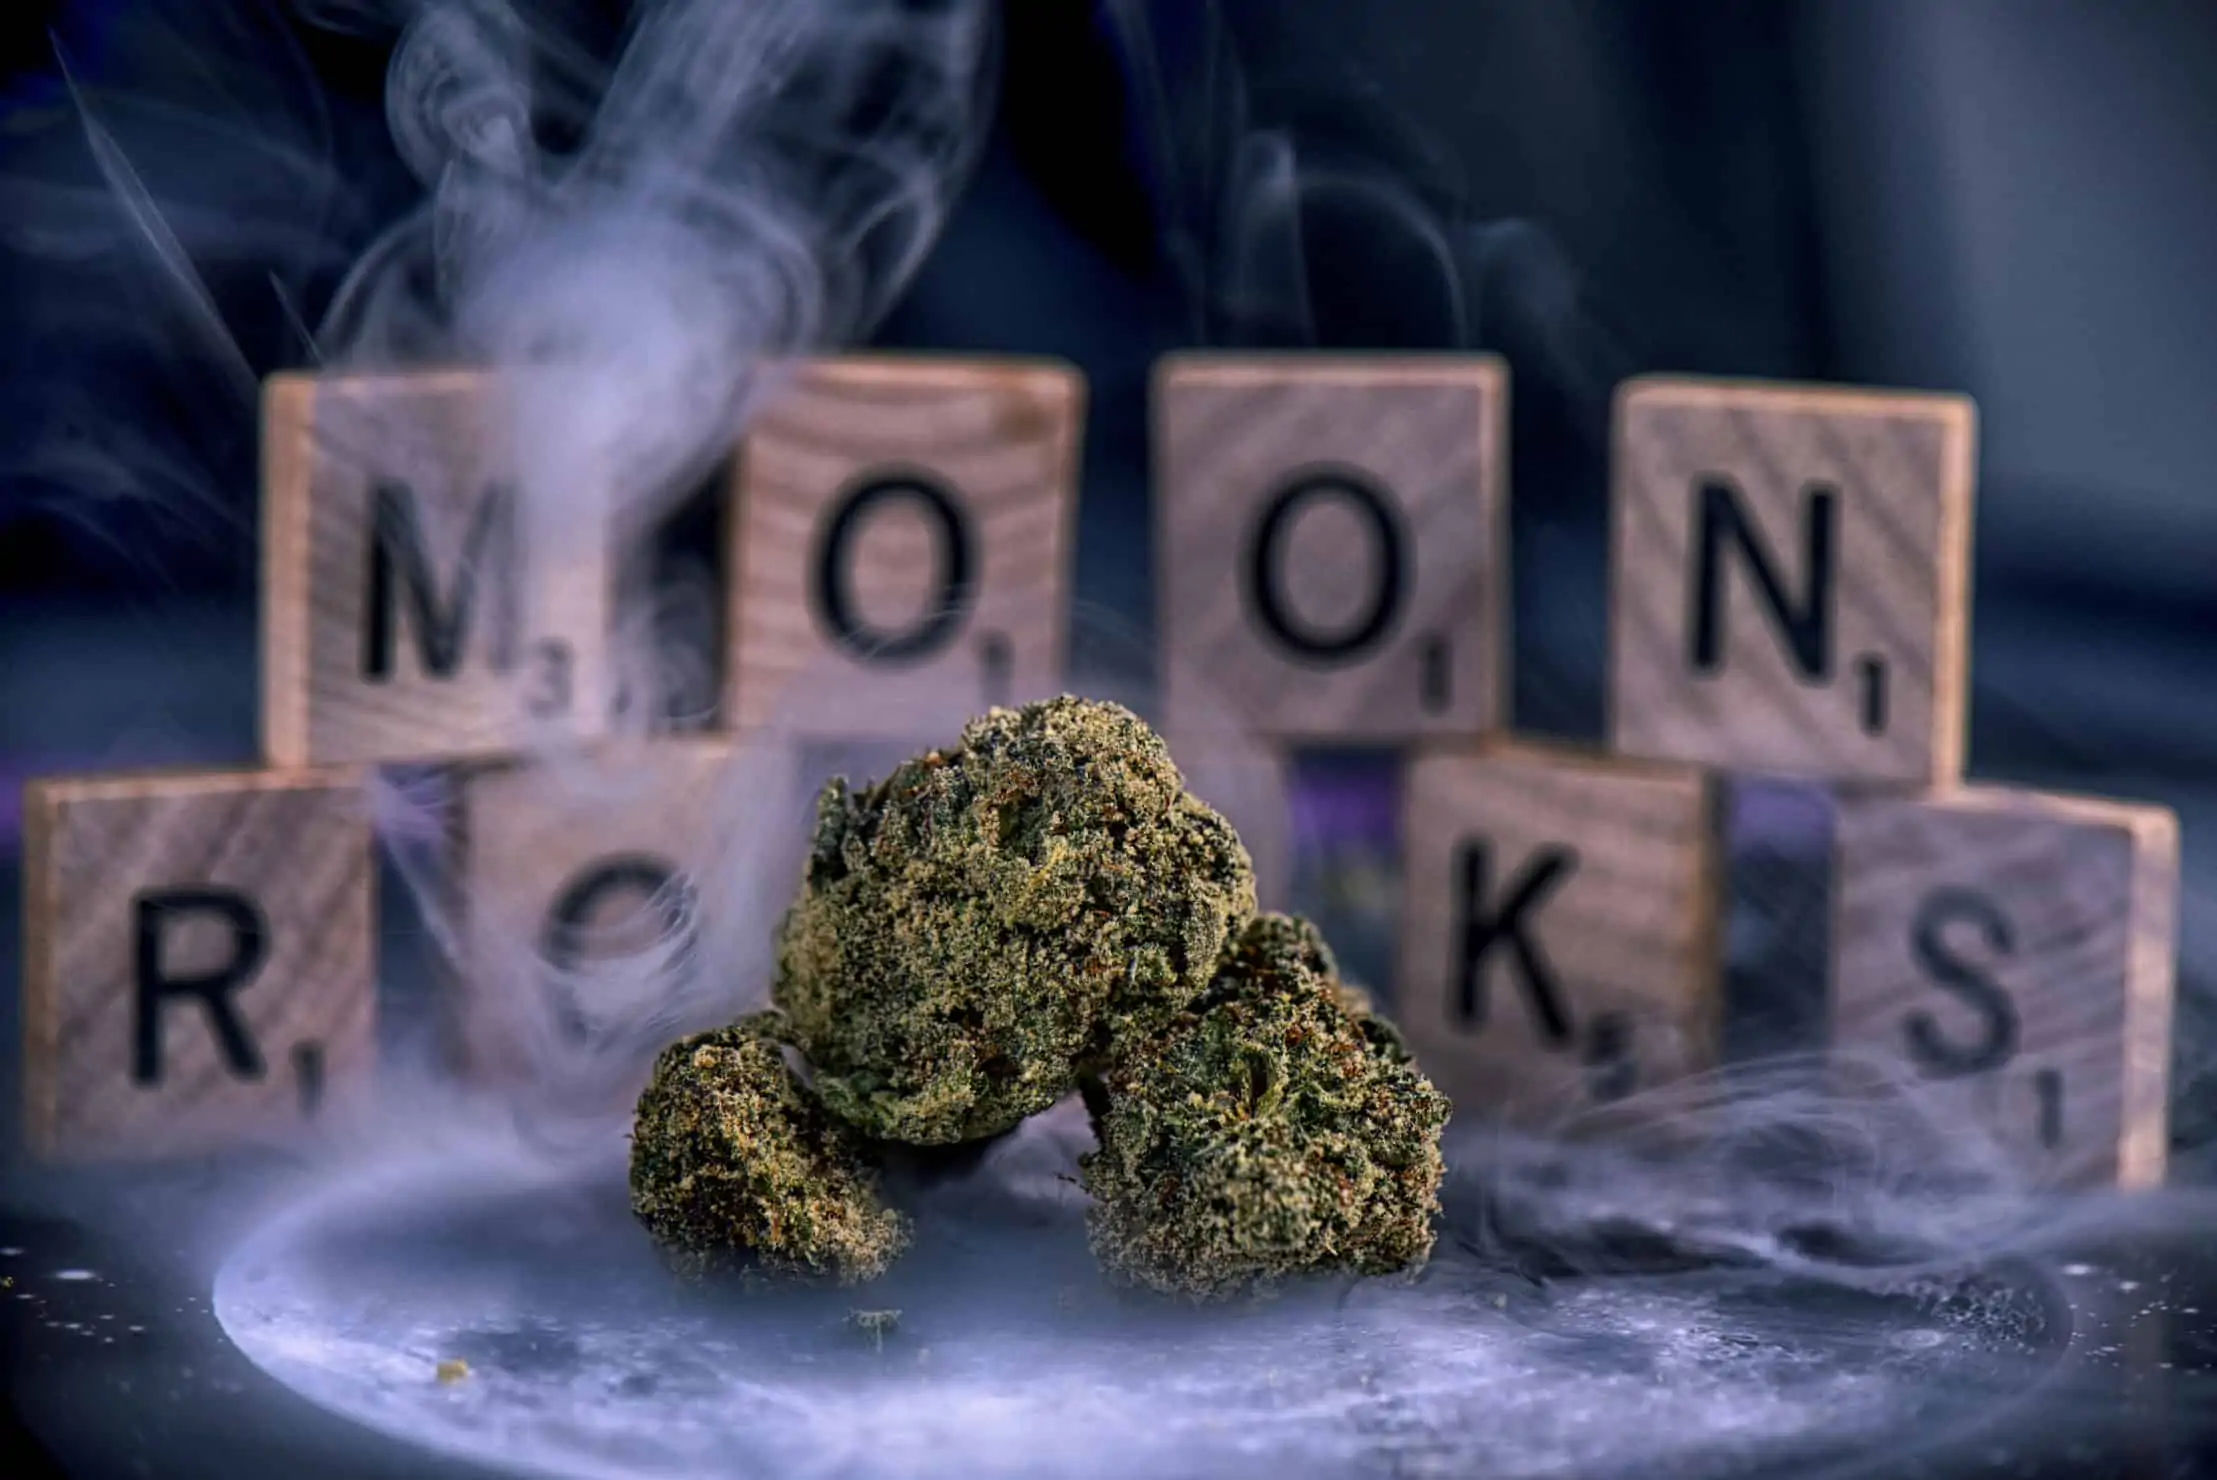 What Are Moon Rocks and How Do You Make Them?